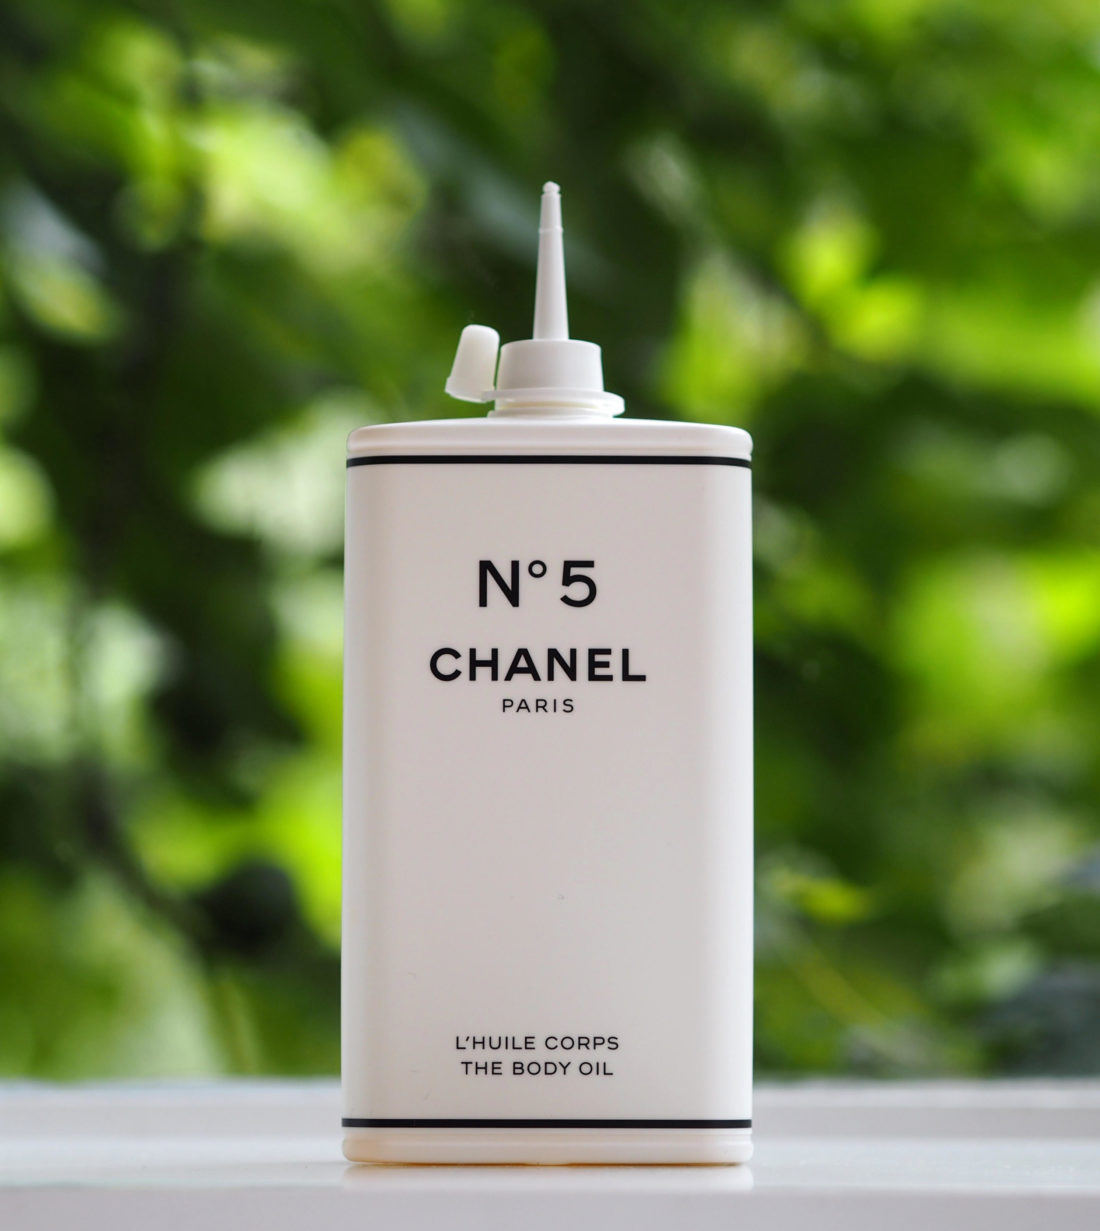 Chanel continues the celebration of N°5 with Chanel Factory 5